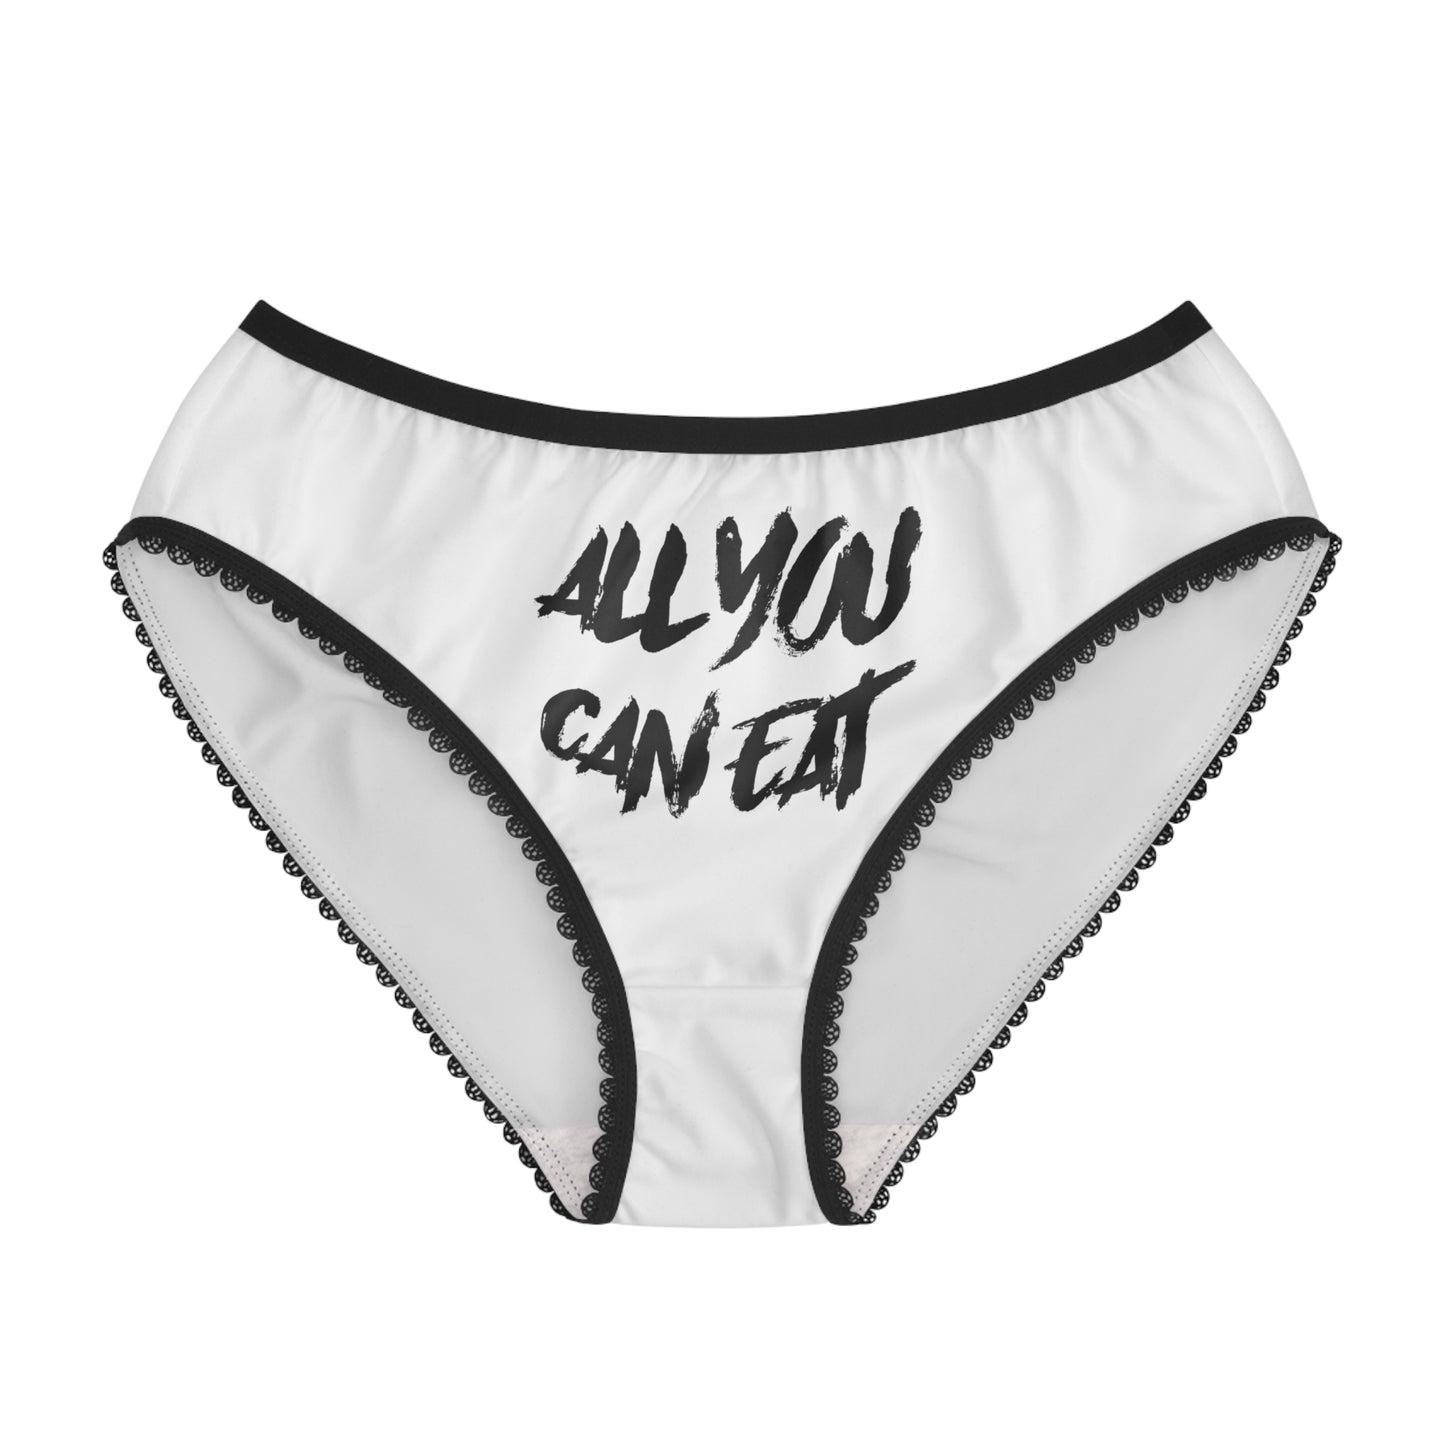 All You Can Eat Women's Briefs, Womens Underwear, Womens Panties, Sexy Lingerie, Wedding Gift, Bachelorette Party